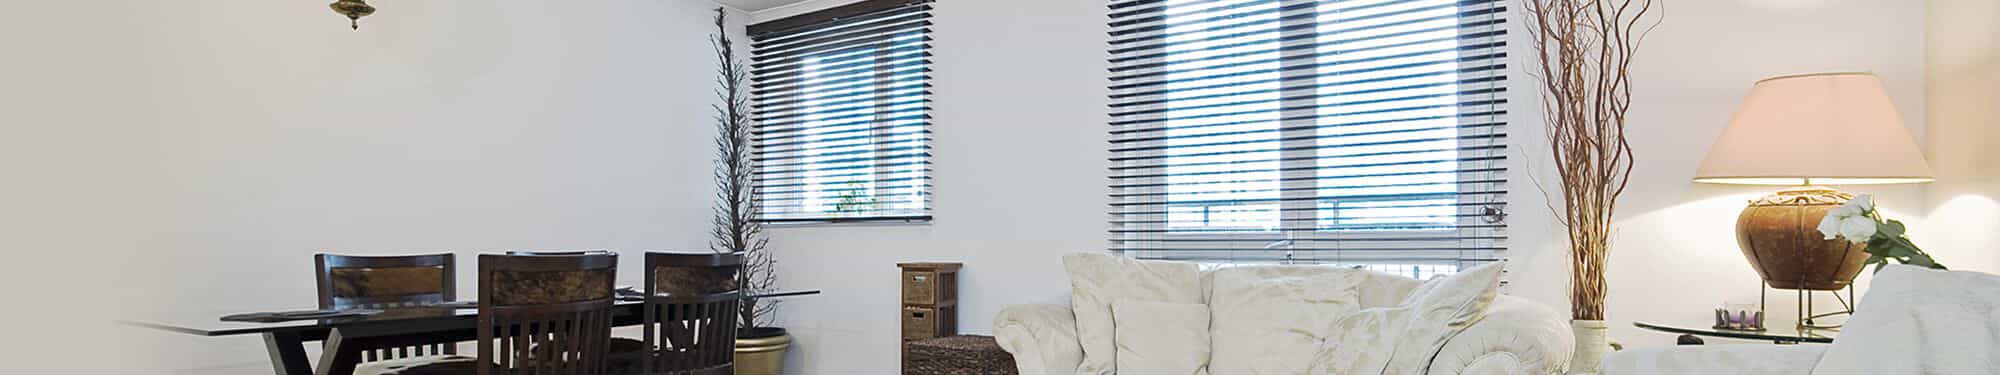 custom blinds in a living & dining area